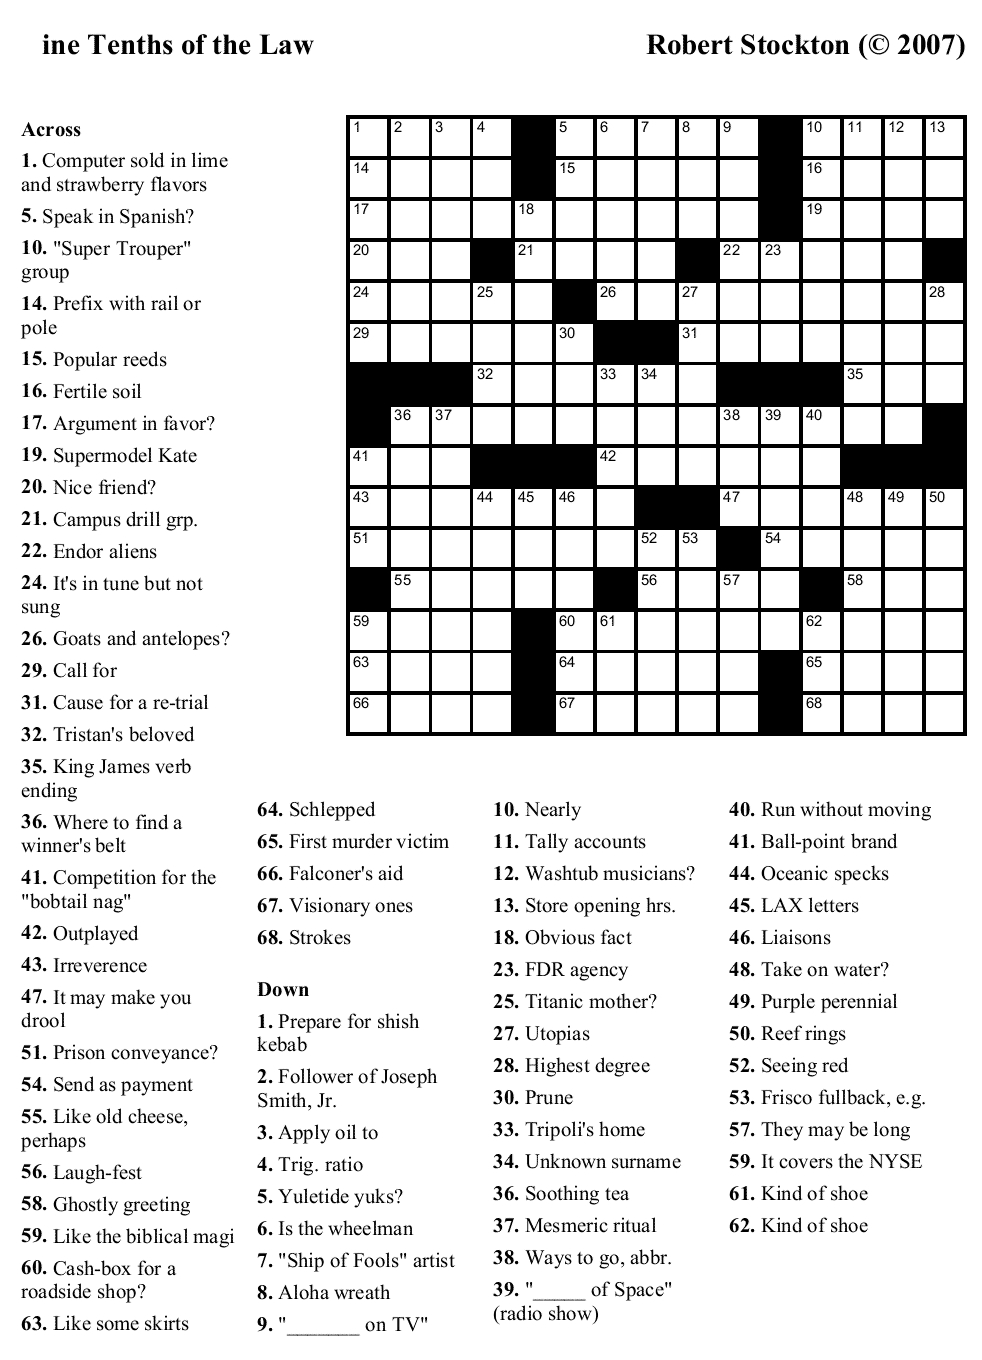 Crossword Puzzles Printable - Yahoo Image Search Results | Crossword - 15X15 Printable Crossword Puzzles